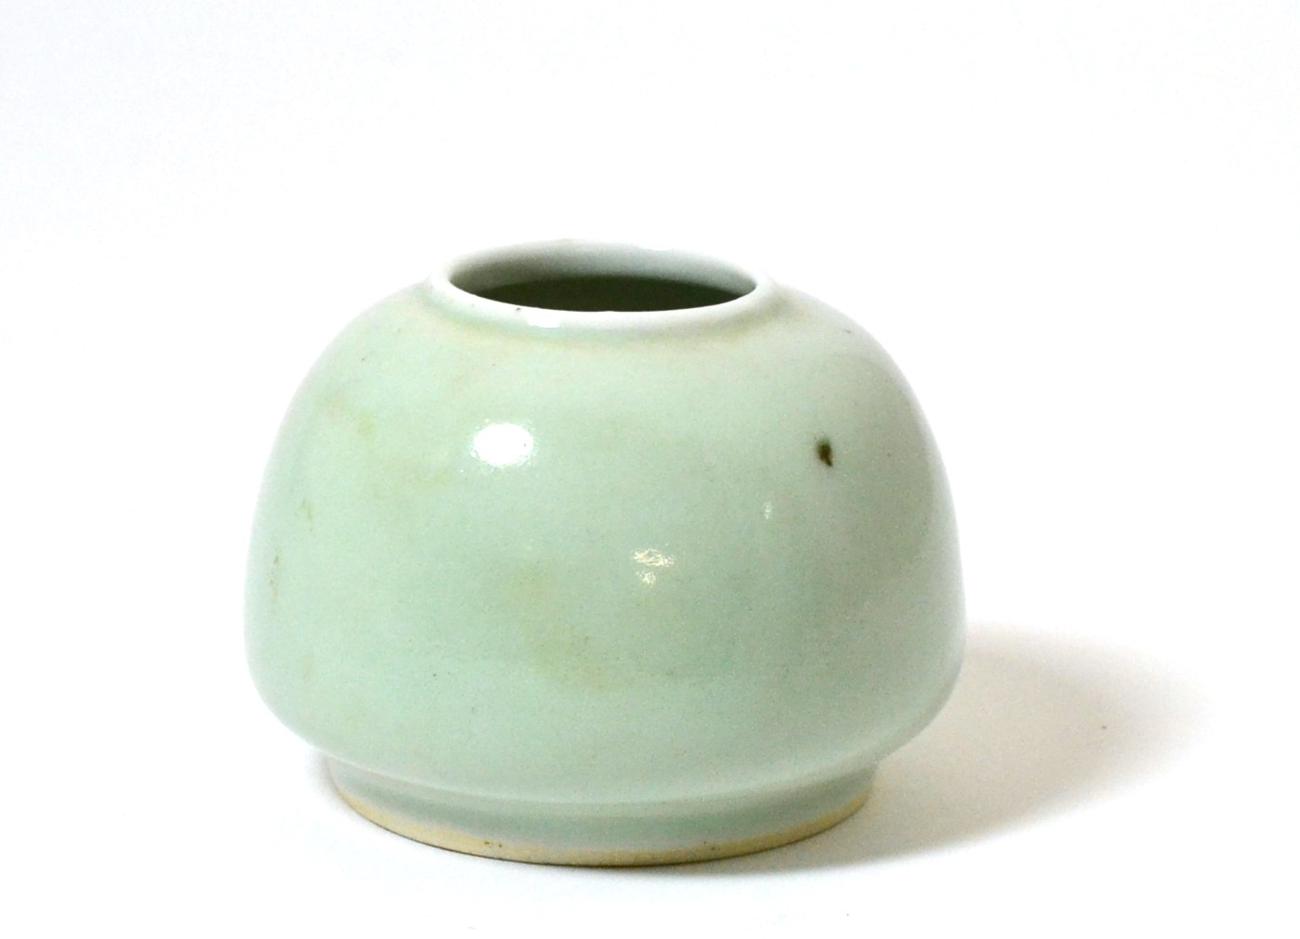 Lot 13 - A Chinese Celadon Glazed Brush Pot, Qing Dynasty, of ovoid form, 6cm high